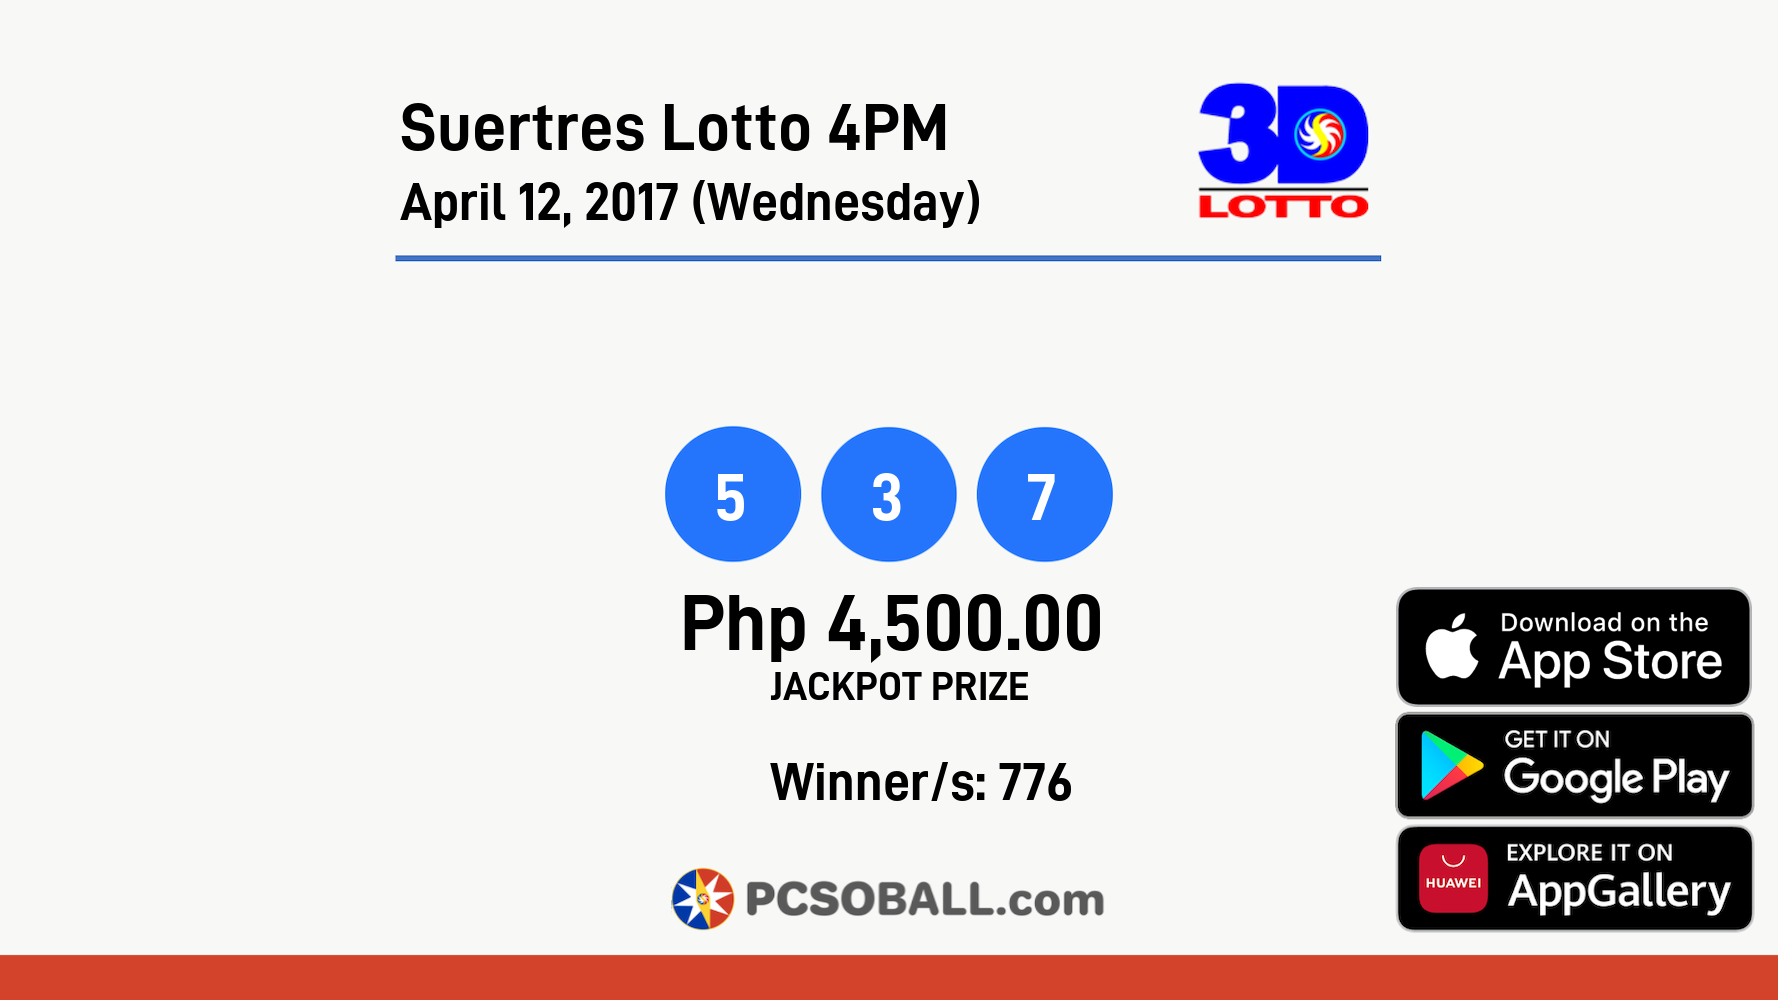 Suertres Lotto 4PM April 12, 2017 (Wednesday) Result